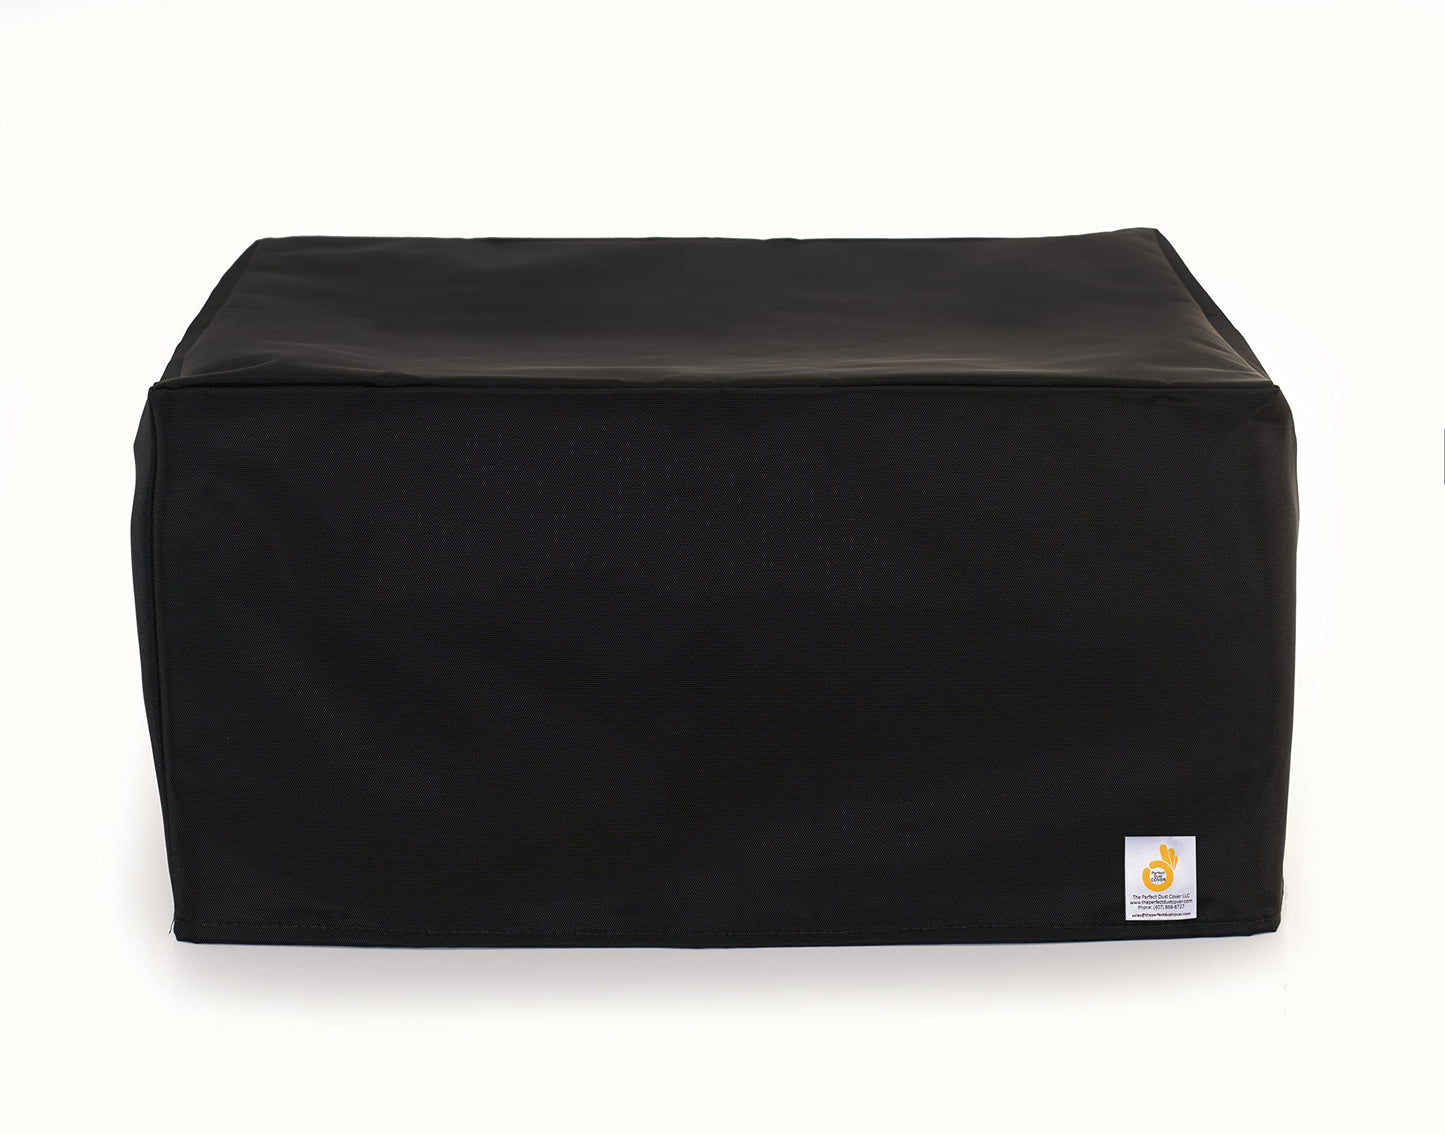 The Perfect Dust Cover, Anti Static Cover for HP Laserjet Pro 200 MFP M276 Laser Printer, Black Nylon and Waterproof Cover Dimensions 17.7''W x 18.7''D x 16.3''H by The Perfect Dust Cover LLC